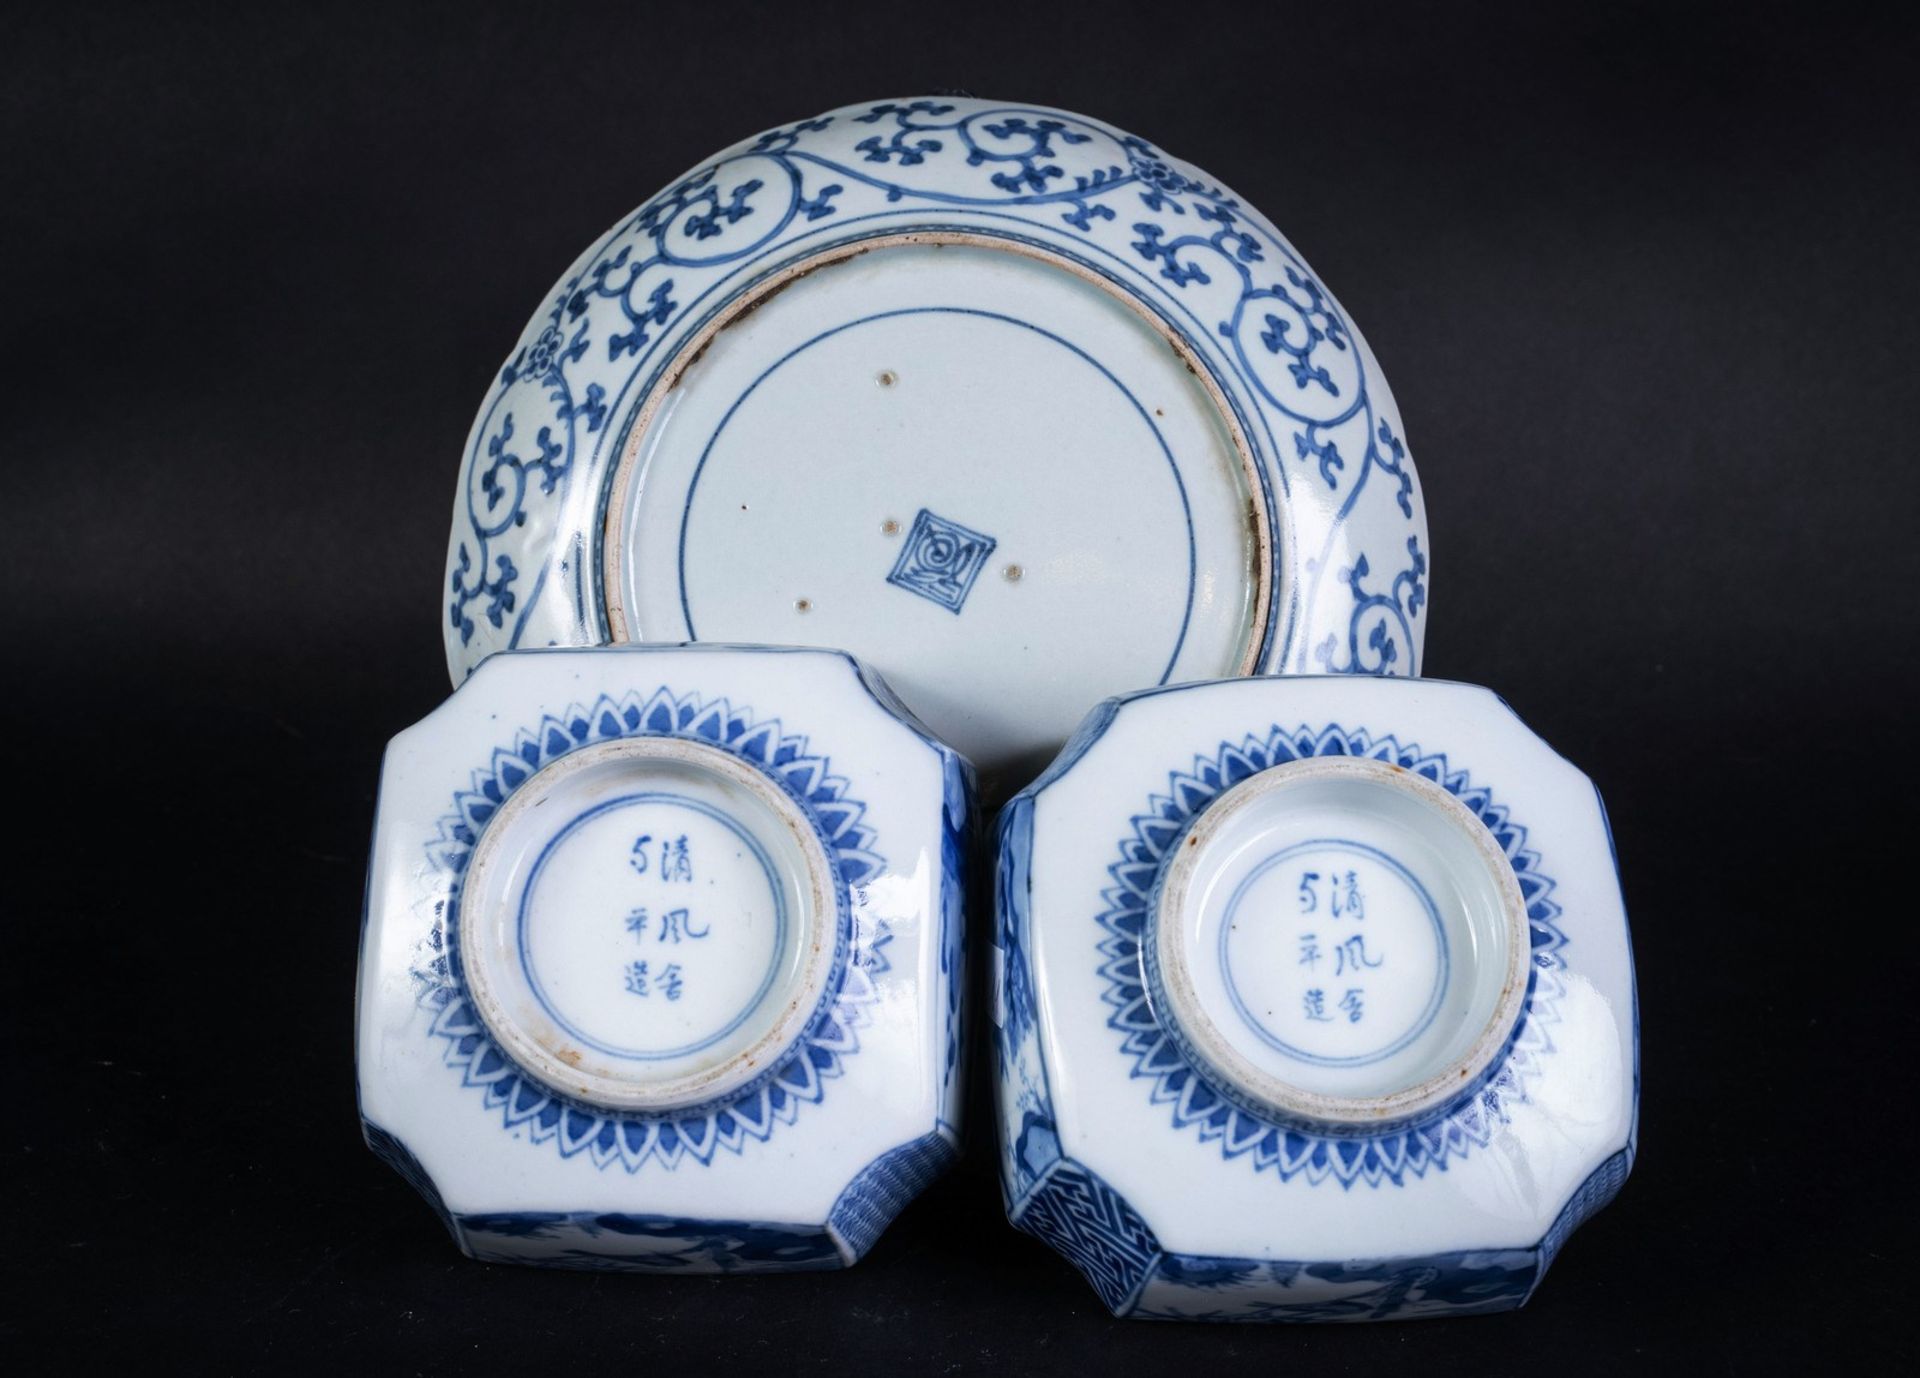 ARTE GIAPPONESE  A group of blue and white Arita pottery items bearing marks at the baseJapan, 18th- - Bild 6 aus 6